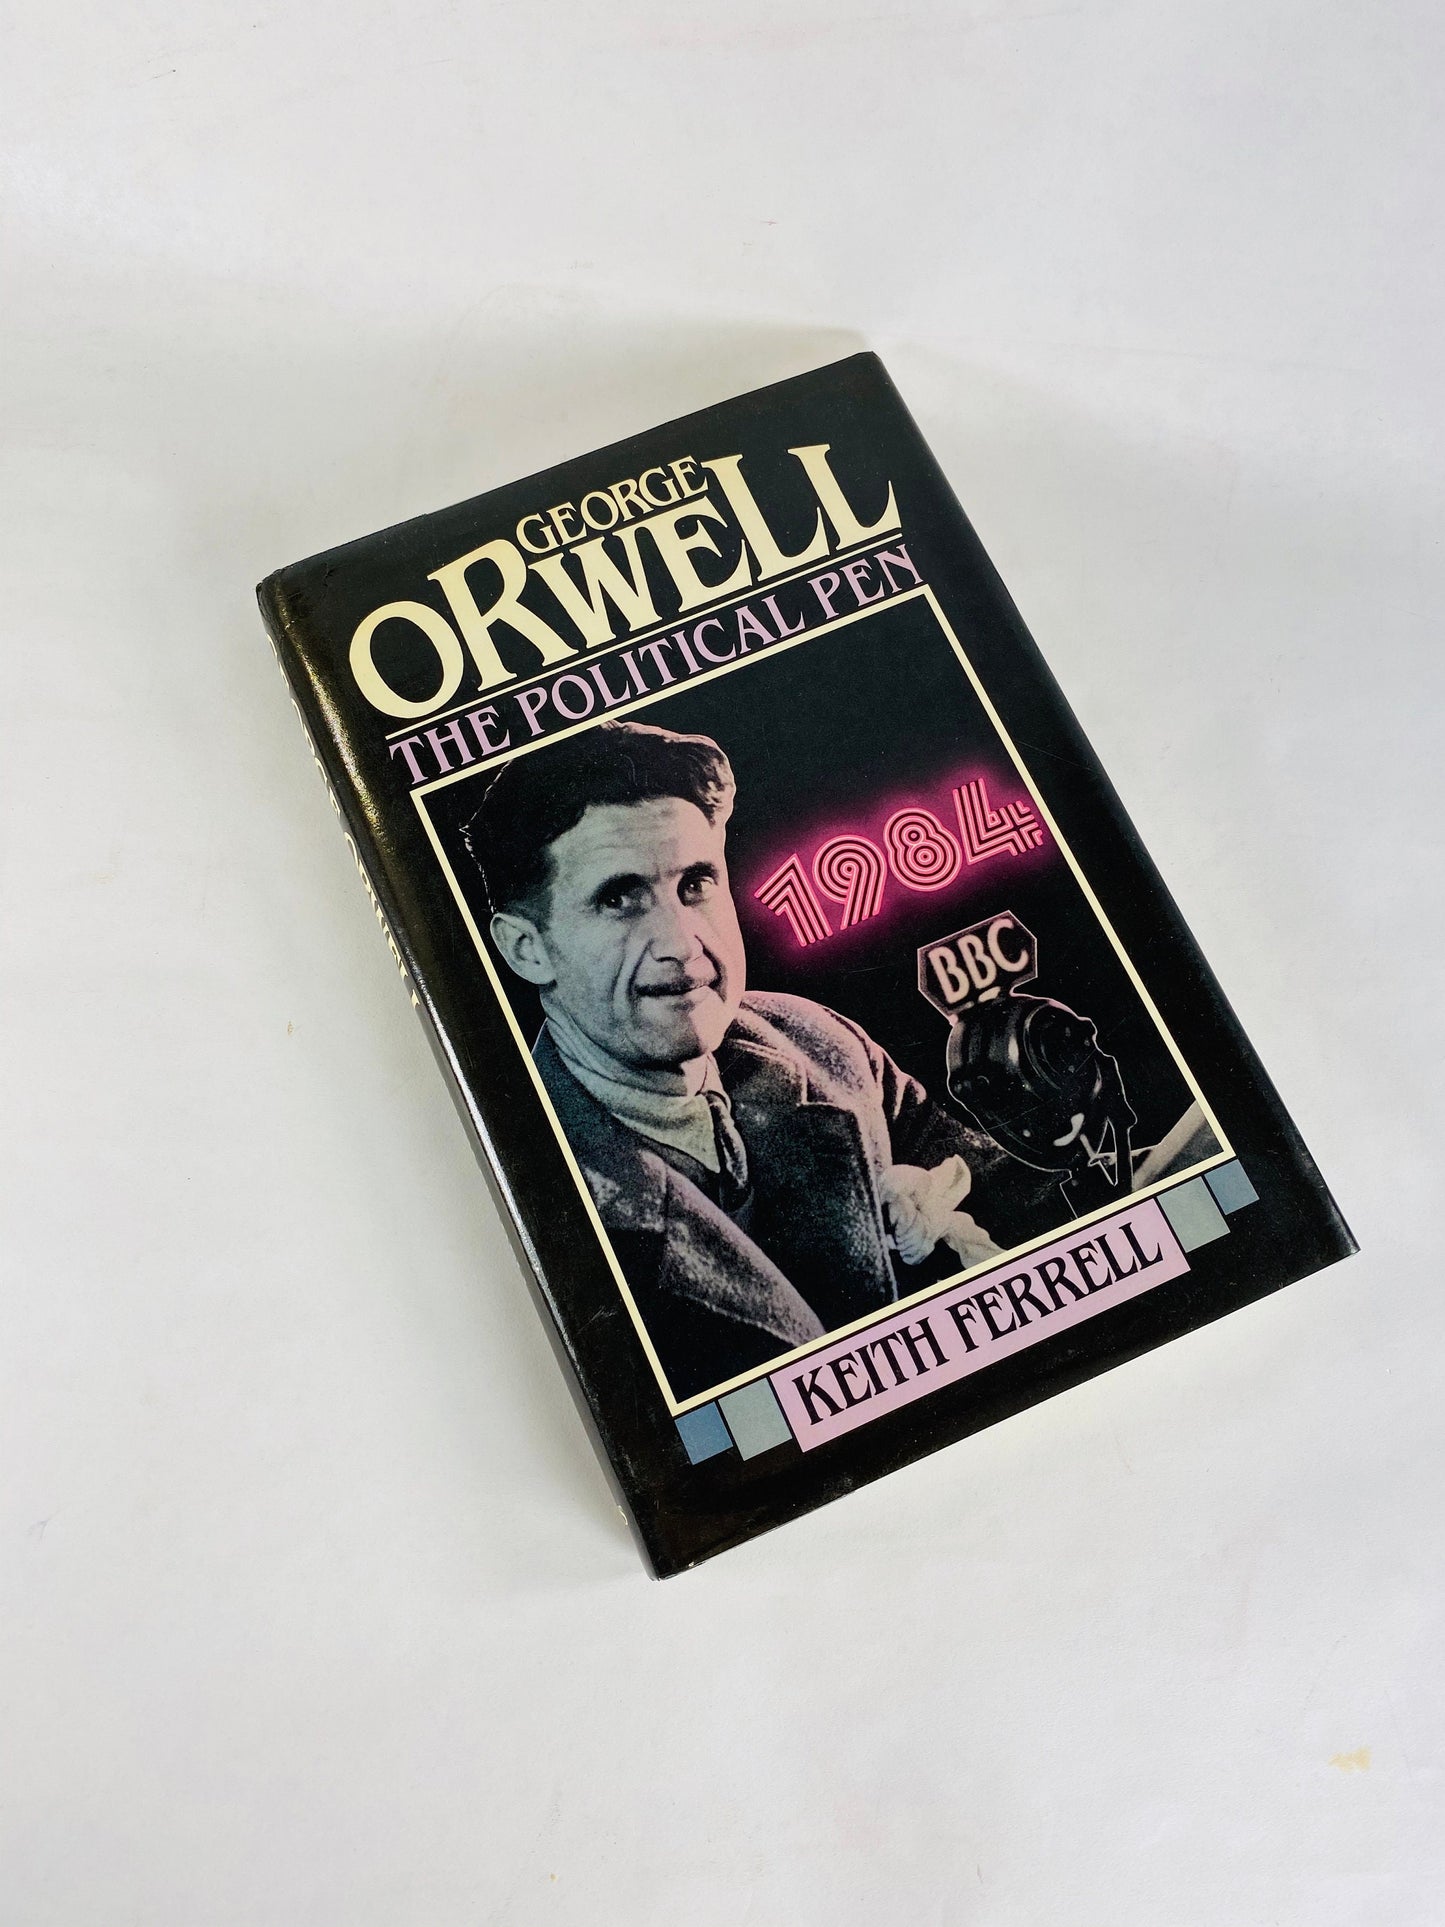 George Orwell biography FIRST EDITION Vintage book circa 1985 The Political Pen by Keith Ferrell. Classic dystopian literature gift